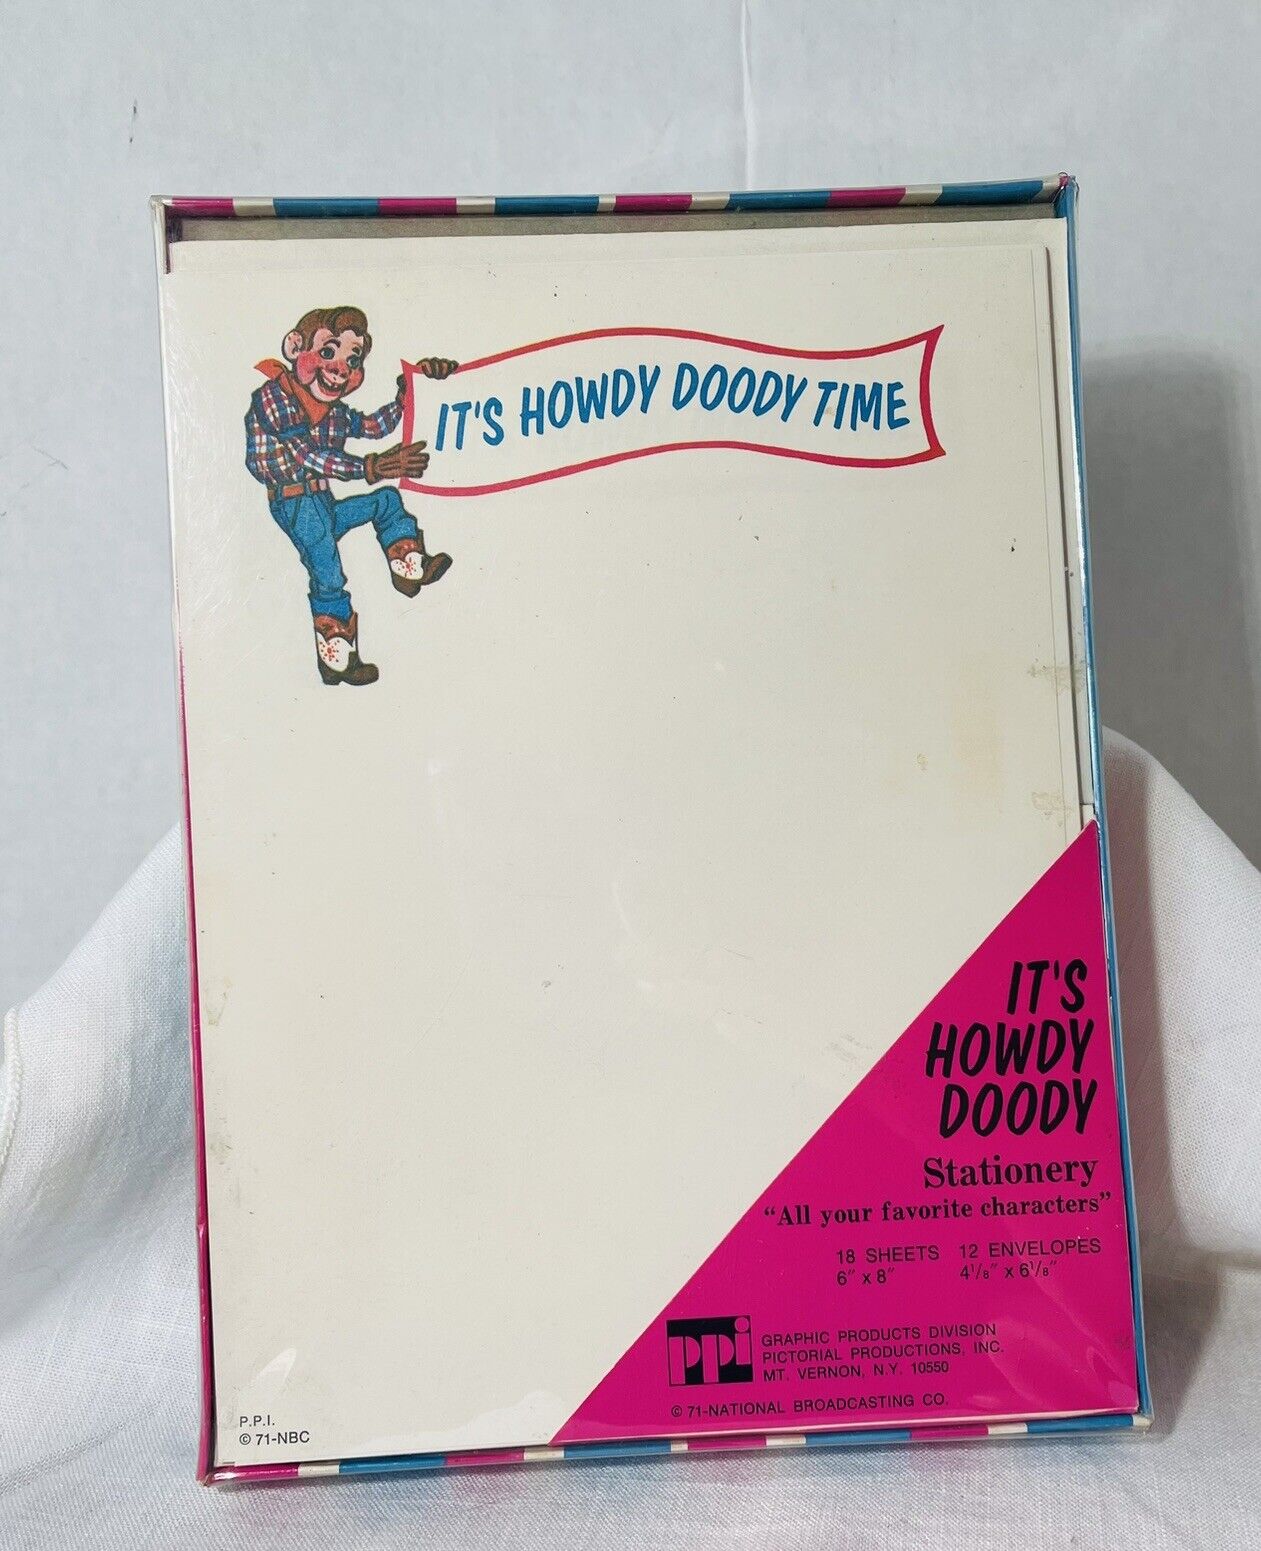 Vintage It’s Howdy Doody Time Stationery Original Box 18 Sheets 6 Envelopes